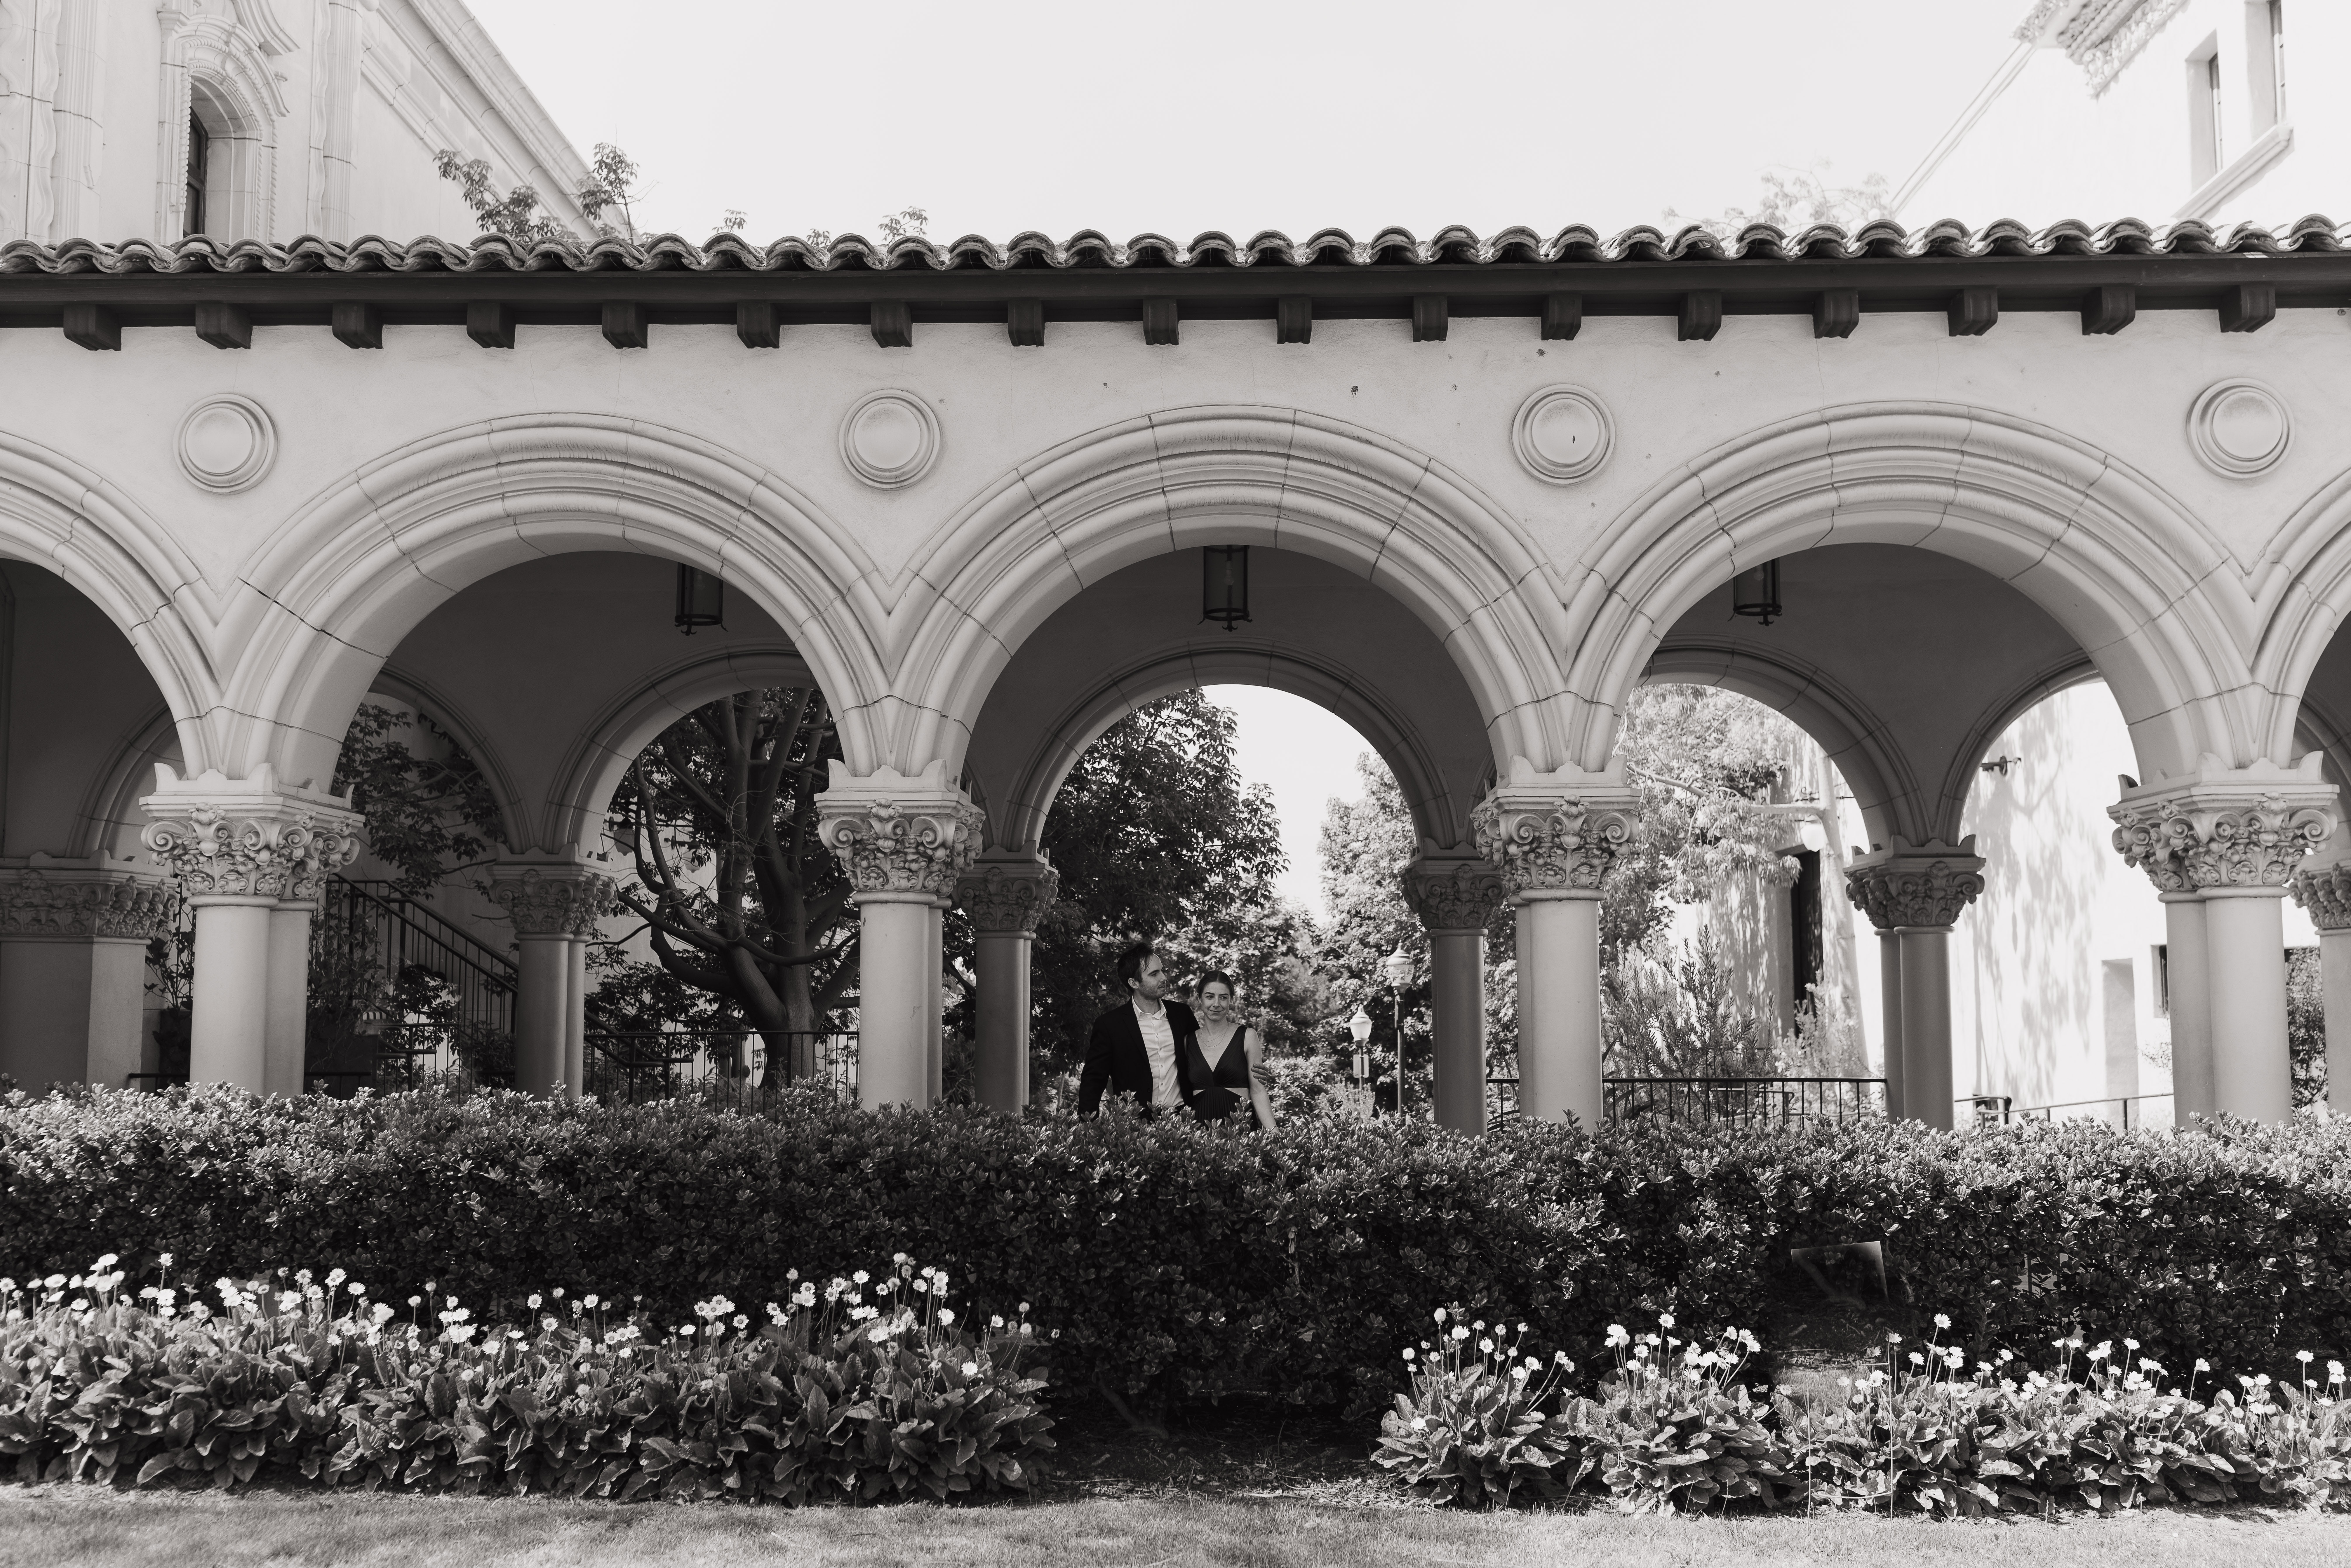 Adding "Something Blue" Details to An Engagement Session at Balboa Park by Kayla Shenk Photo